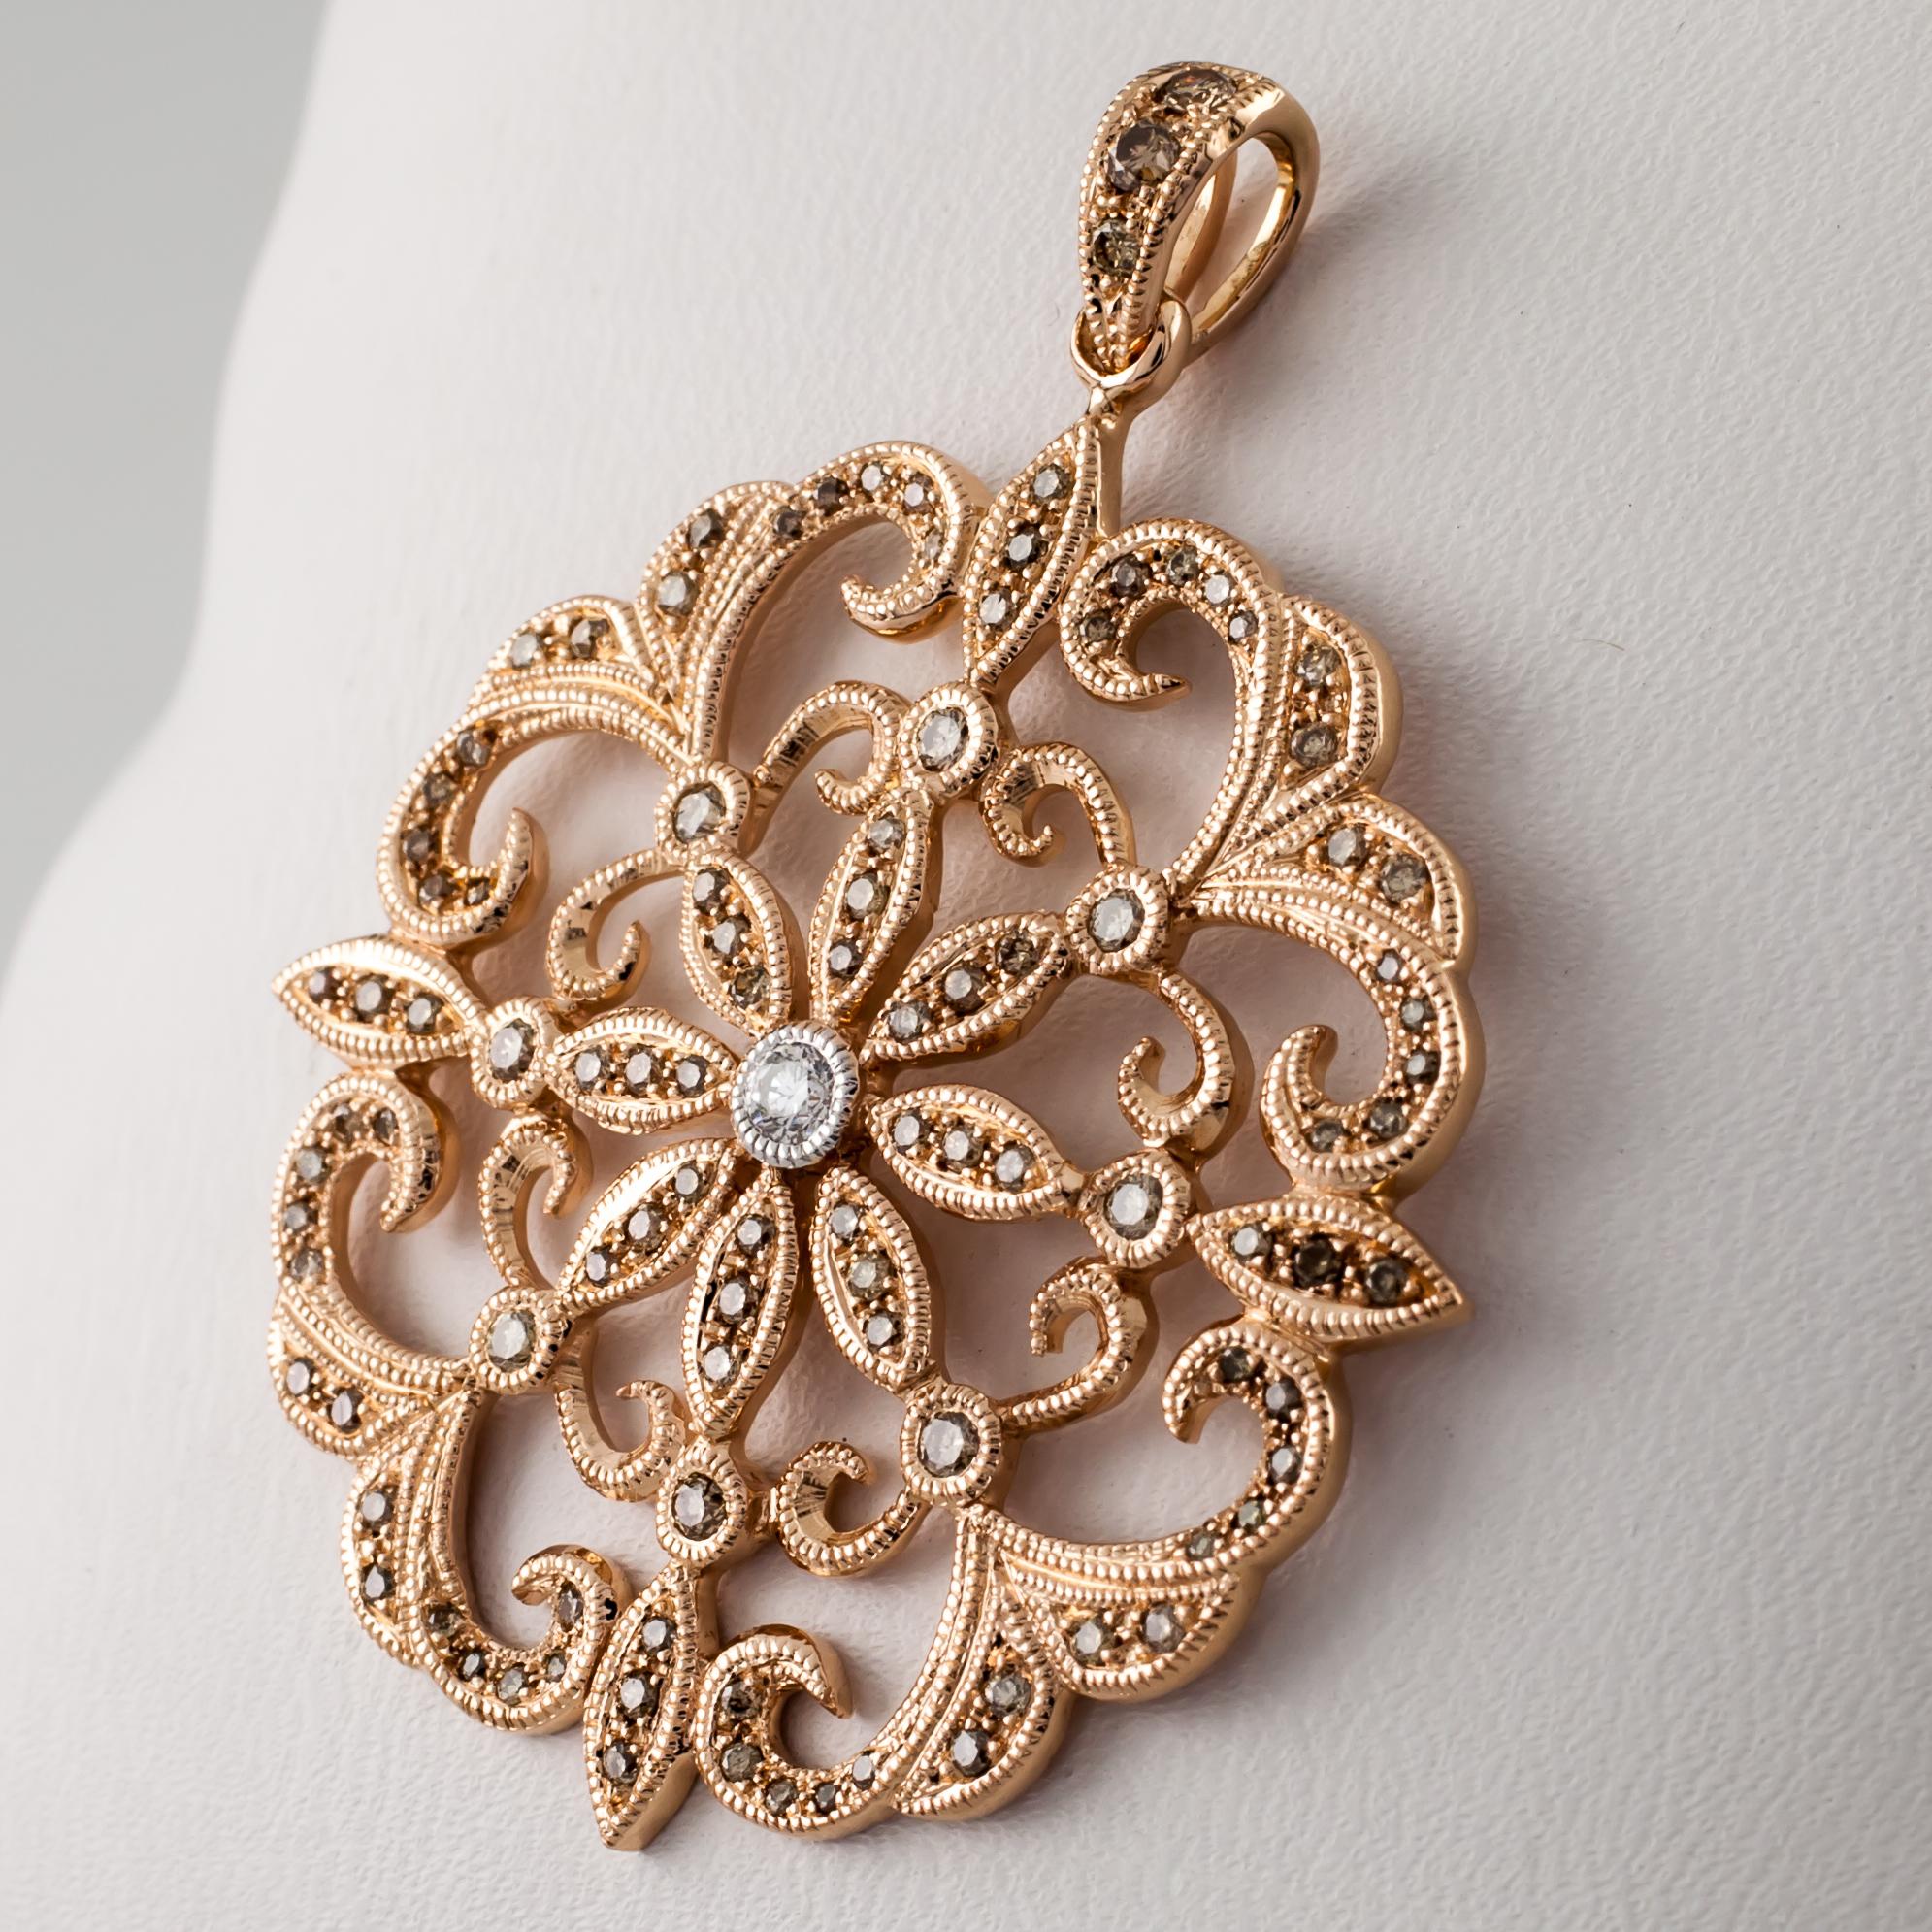 Gorgeous Floral Pendant
14k Rose Gold
Total Diamond Weight = 1.00 carat 
Total Mass = 6.4 grams
Size of pendant = 1.5 inches  x 1.25 inches